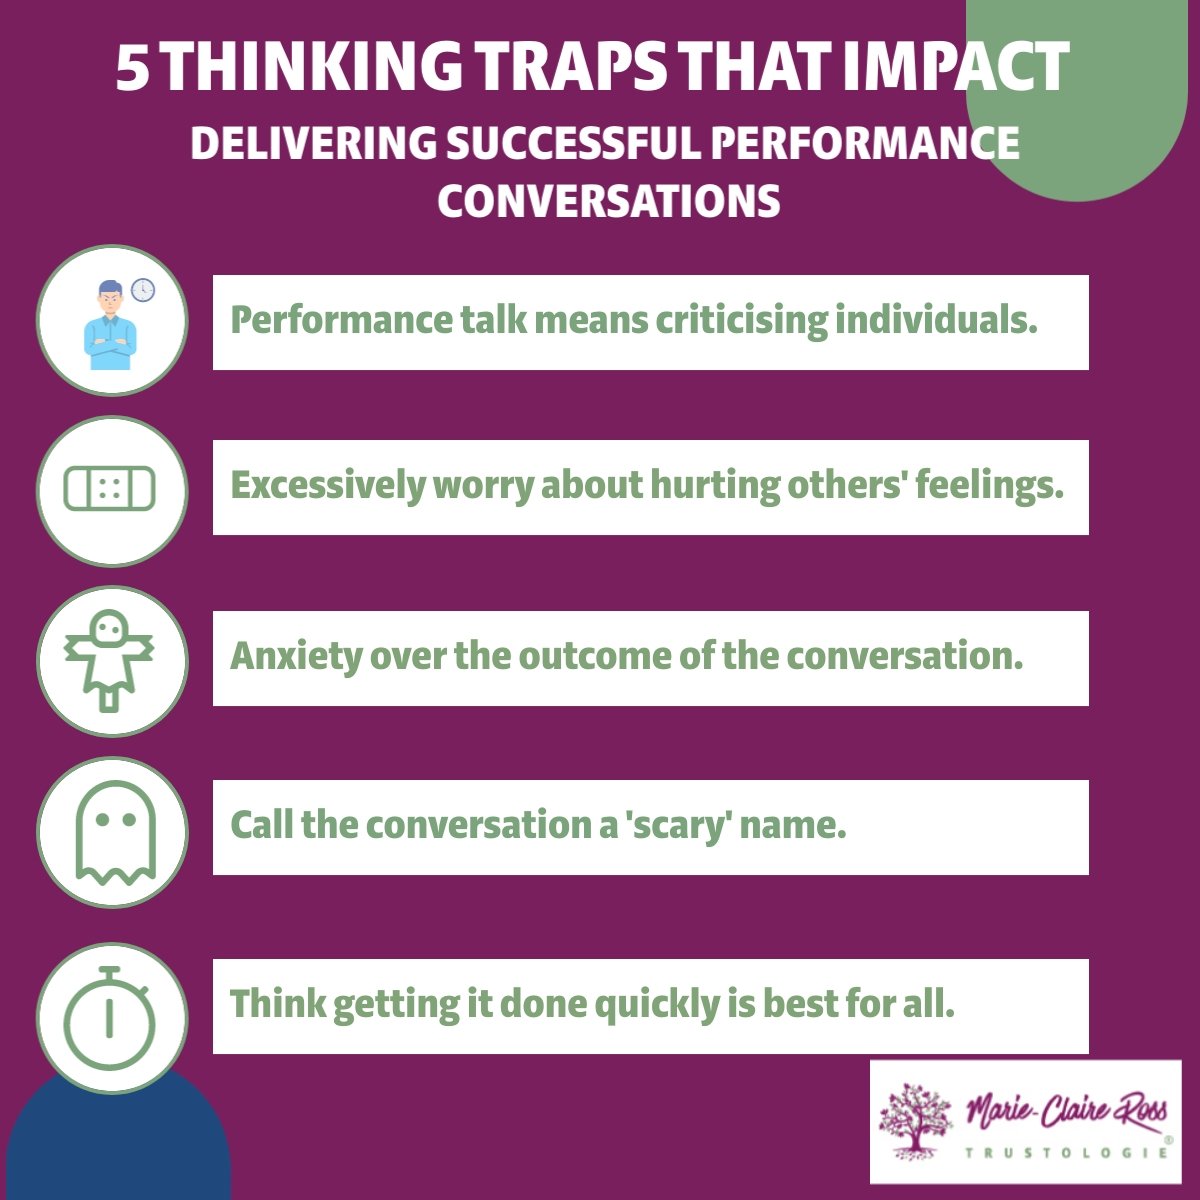 5 THINKING TRAPS THAT IMPACT DELIVERING SUCCESSFUL PERFORMANCE CONVERSATIONS